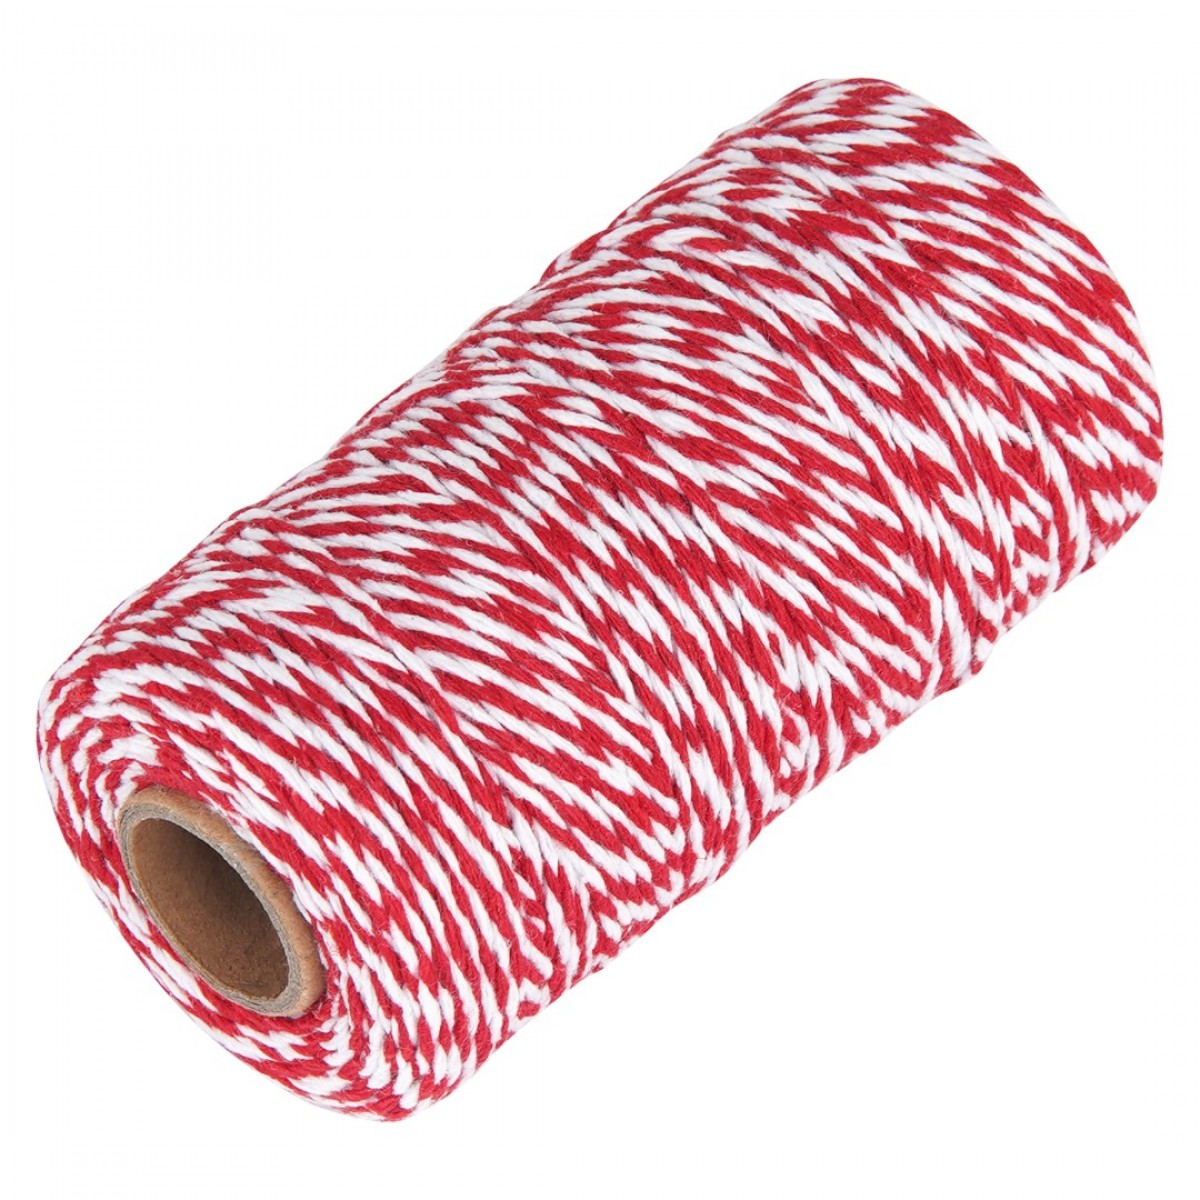 Natural Cotton Twine for Crafts - Ohtomber 328 Feet 2MM Red and White twine string, Garden Twine, Ki